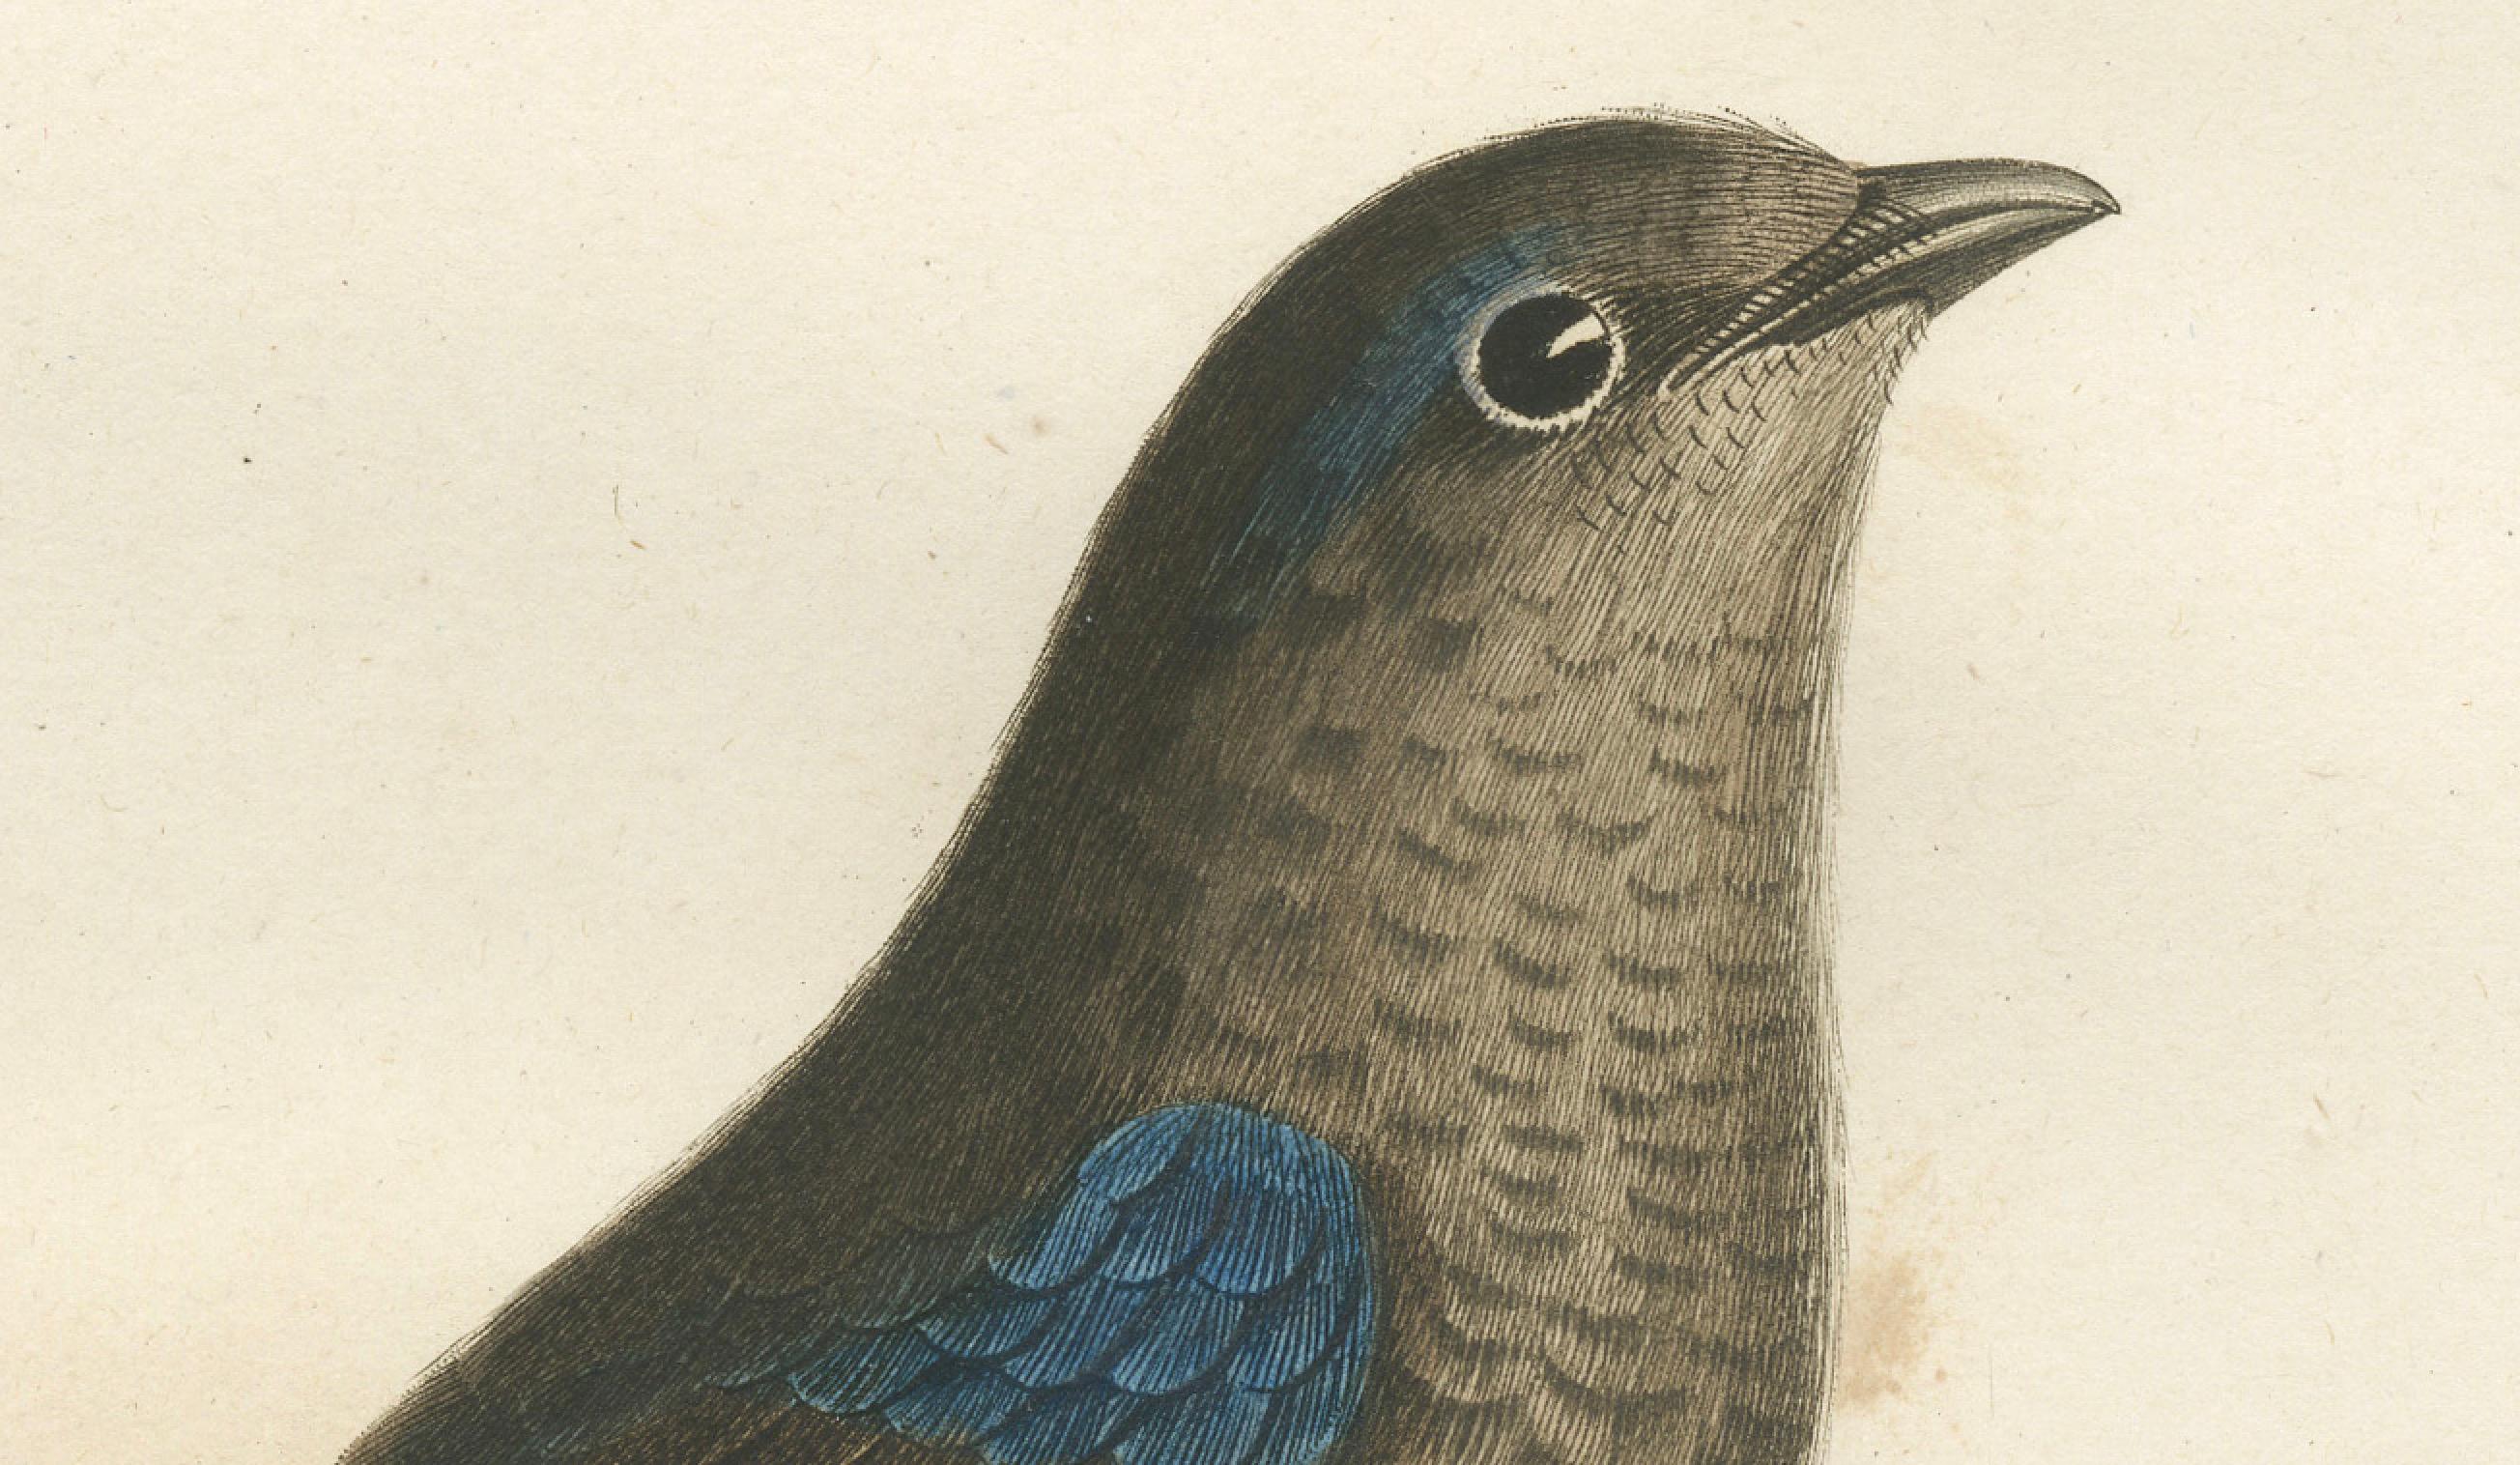 This exceptional antique bird print, entitled 